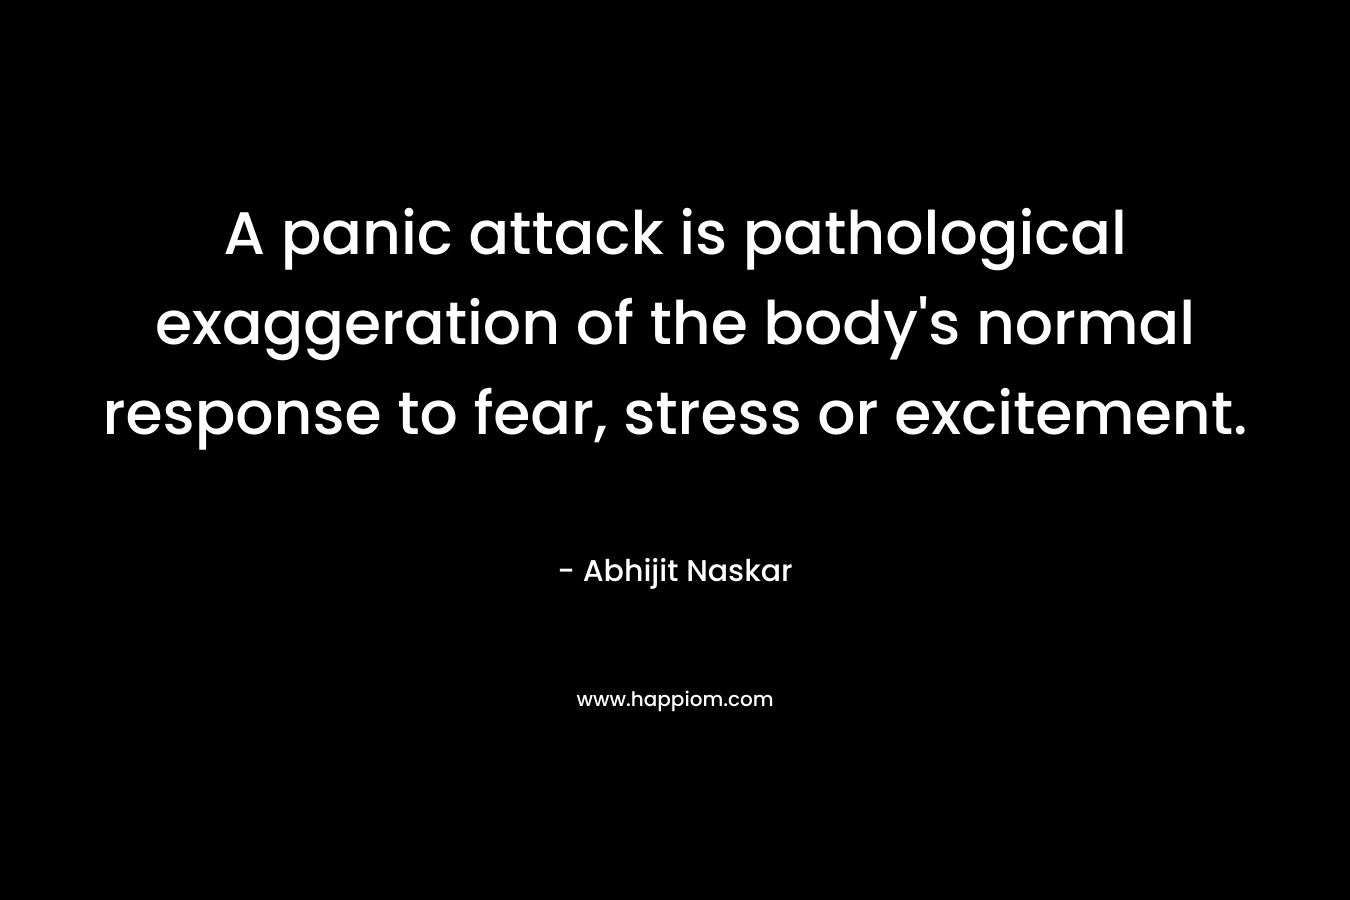 A panic attack is pathological exaggeration of the body’s normal response to fear, stress or excitement. – Abhijit Naskar